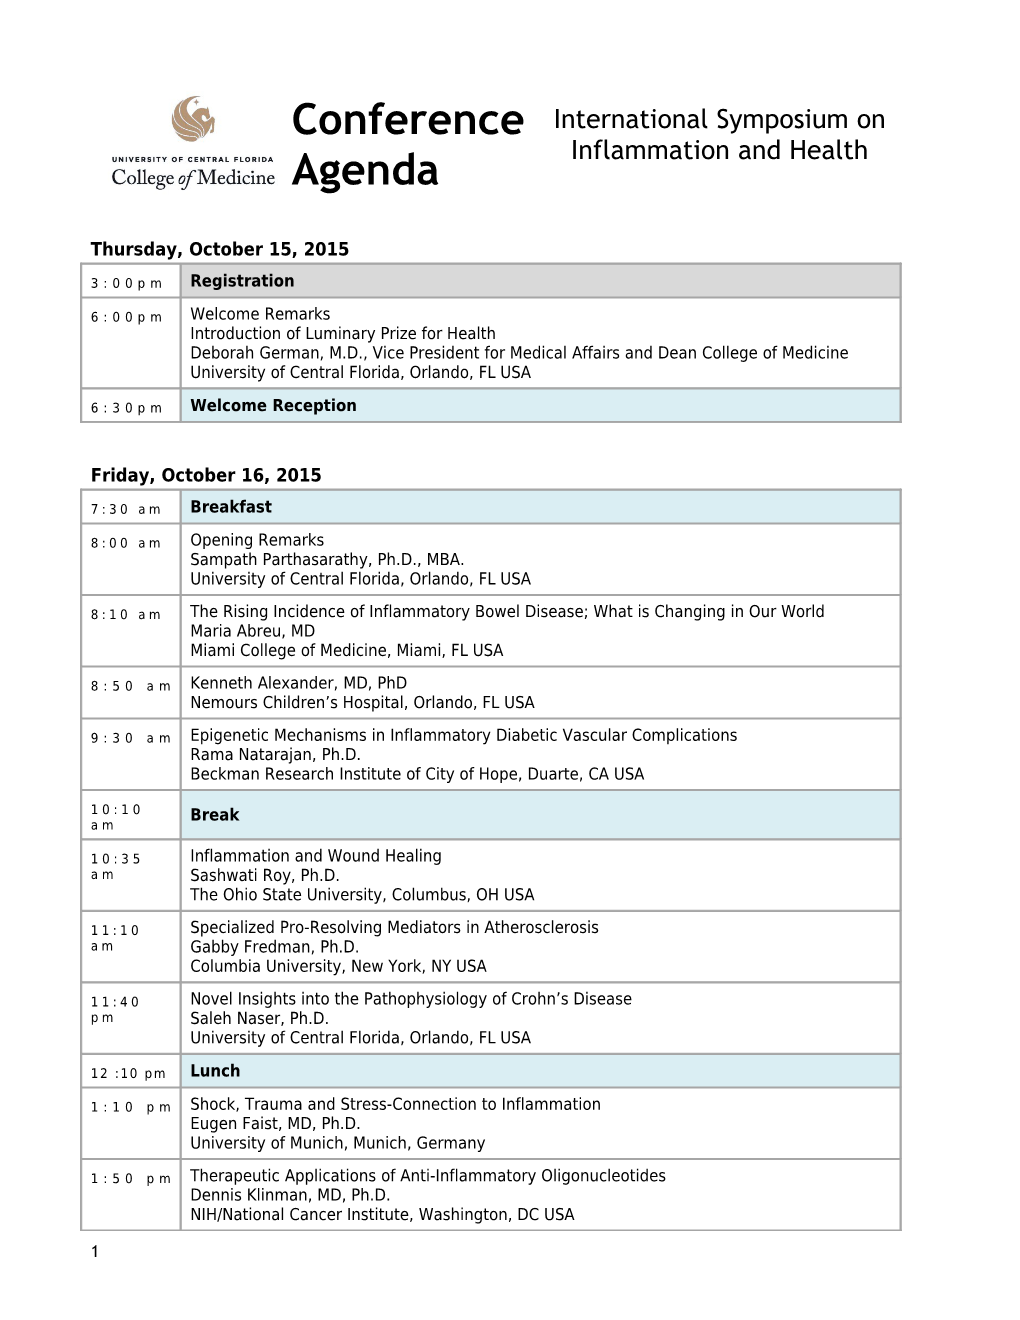 Conference Agenda with Track